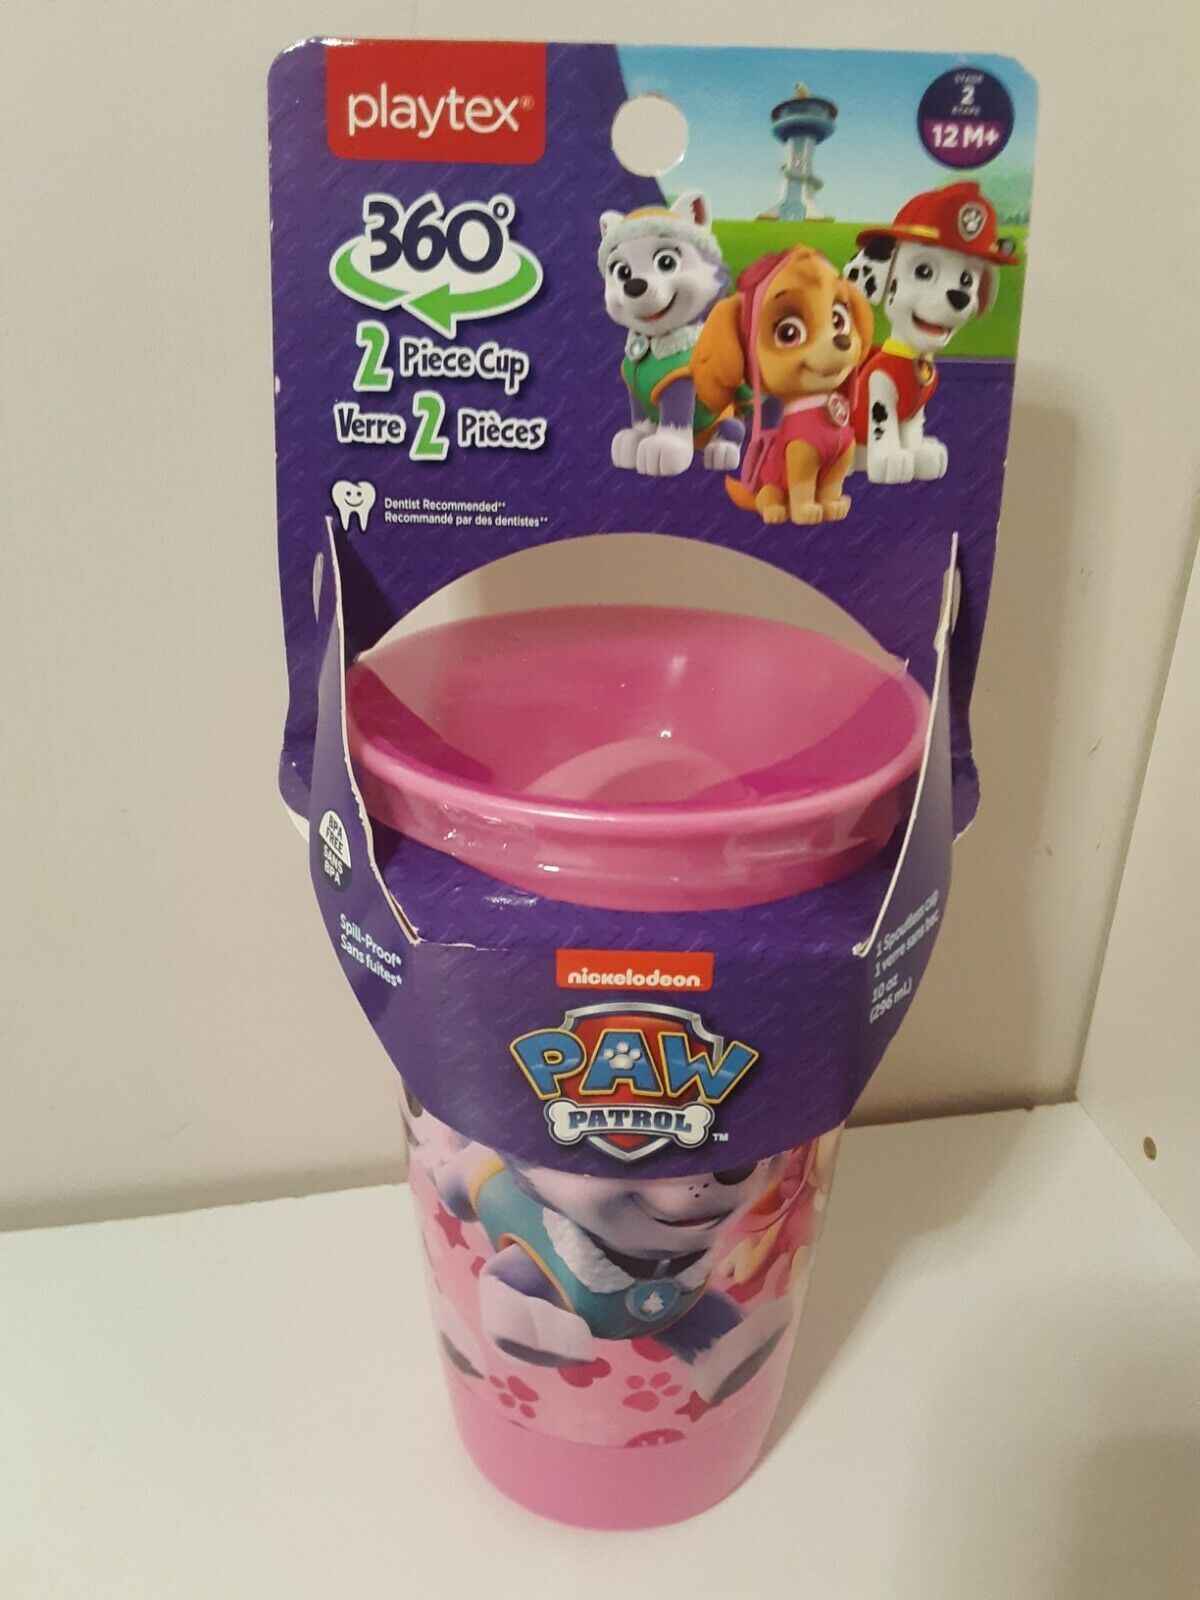 Playtex 360 Nickelodeon Paw Patrol 2 Piece Sippy Cup Stage 2 12 M+ Brand  New - $5.93